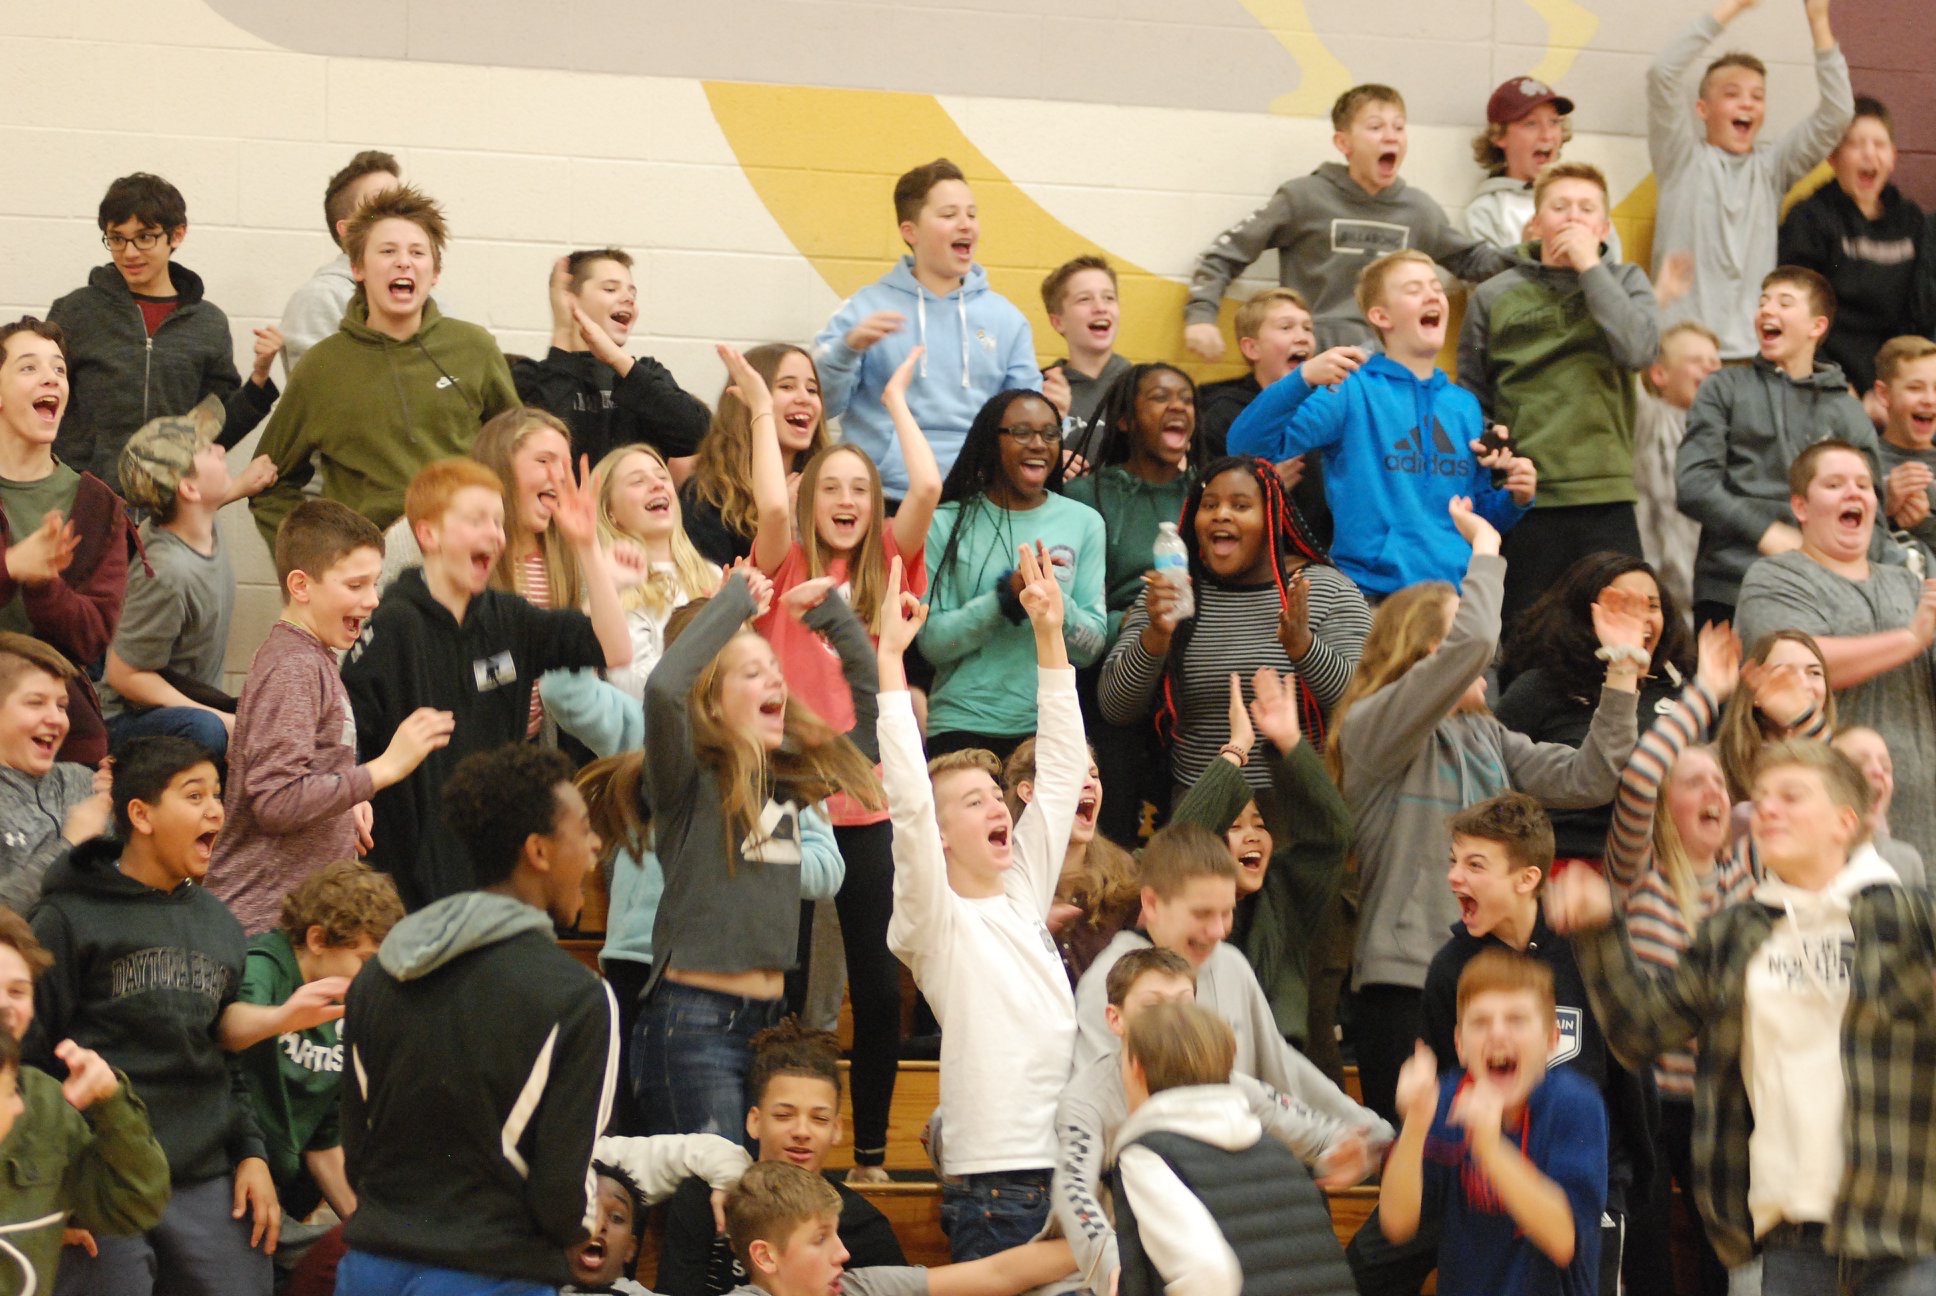 Spectators cheer at a Unified Sports basketball game.